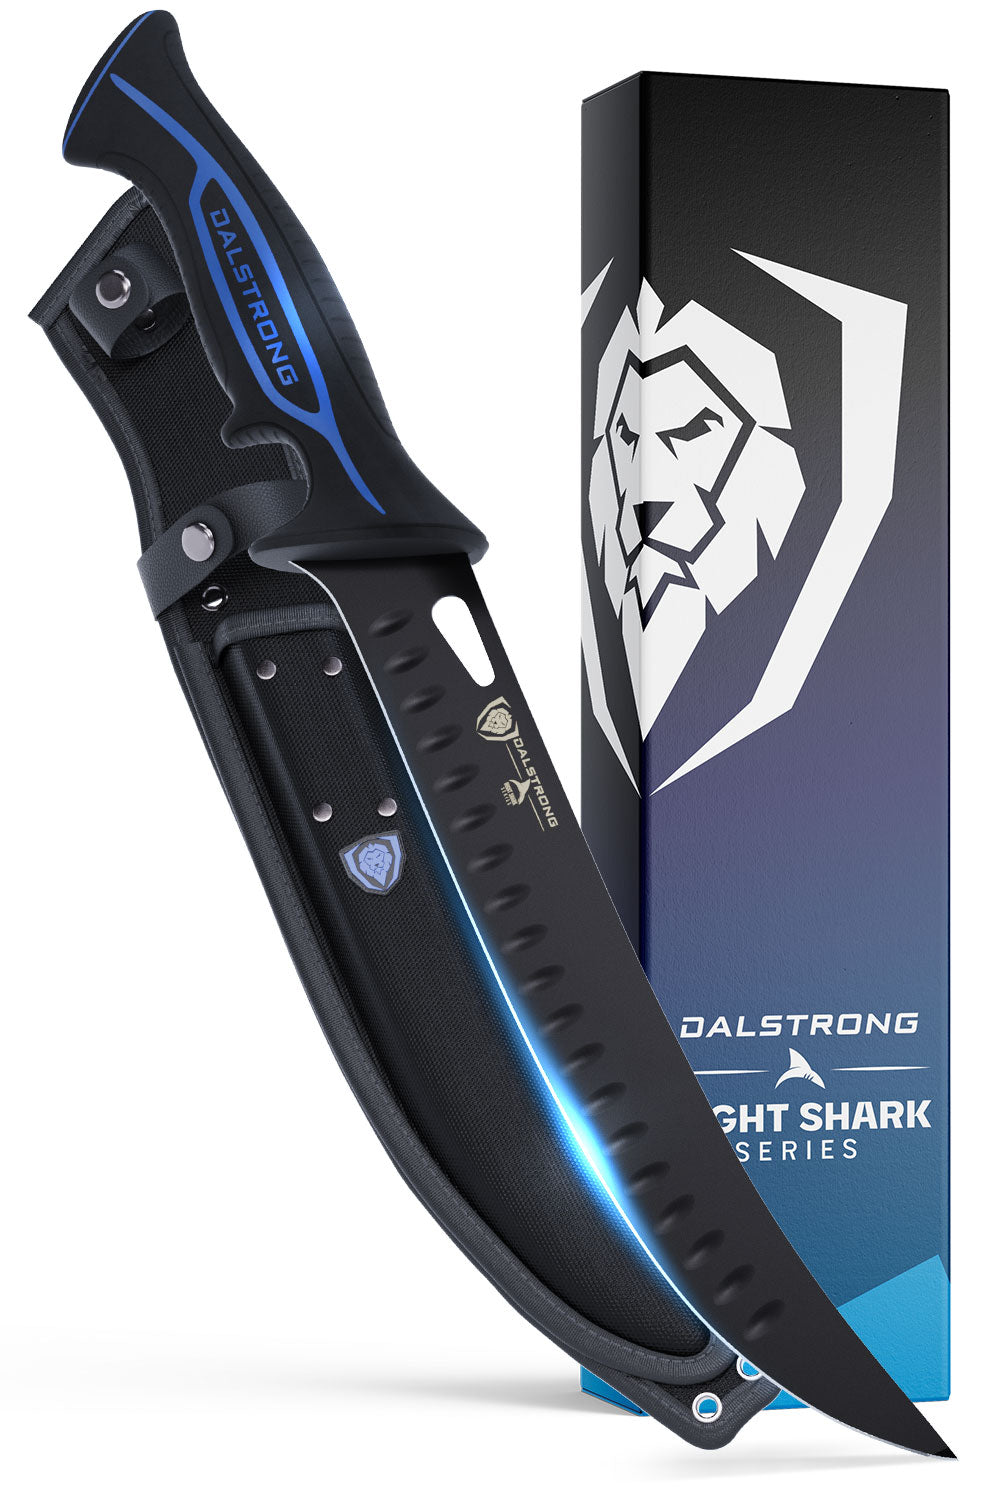 Dalstrong night shark series 10 inch butcher knife in front of it's premium packaging.